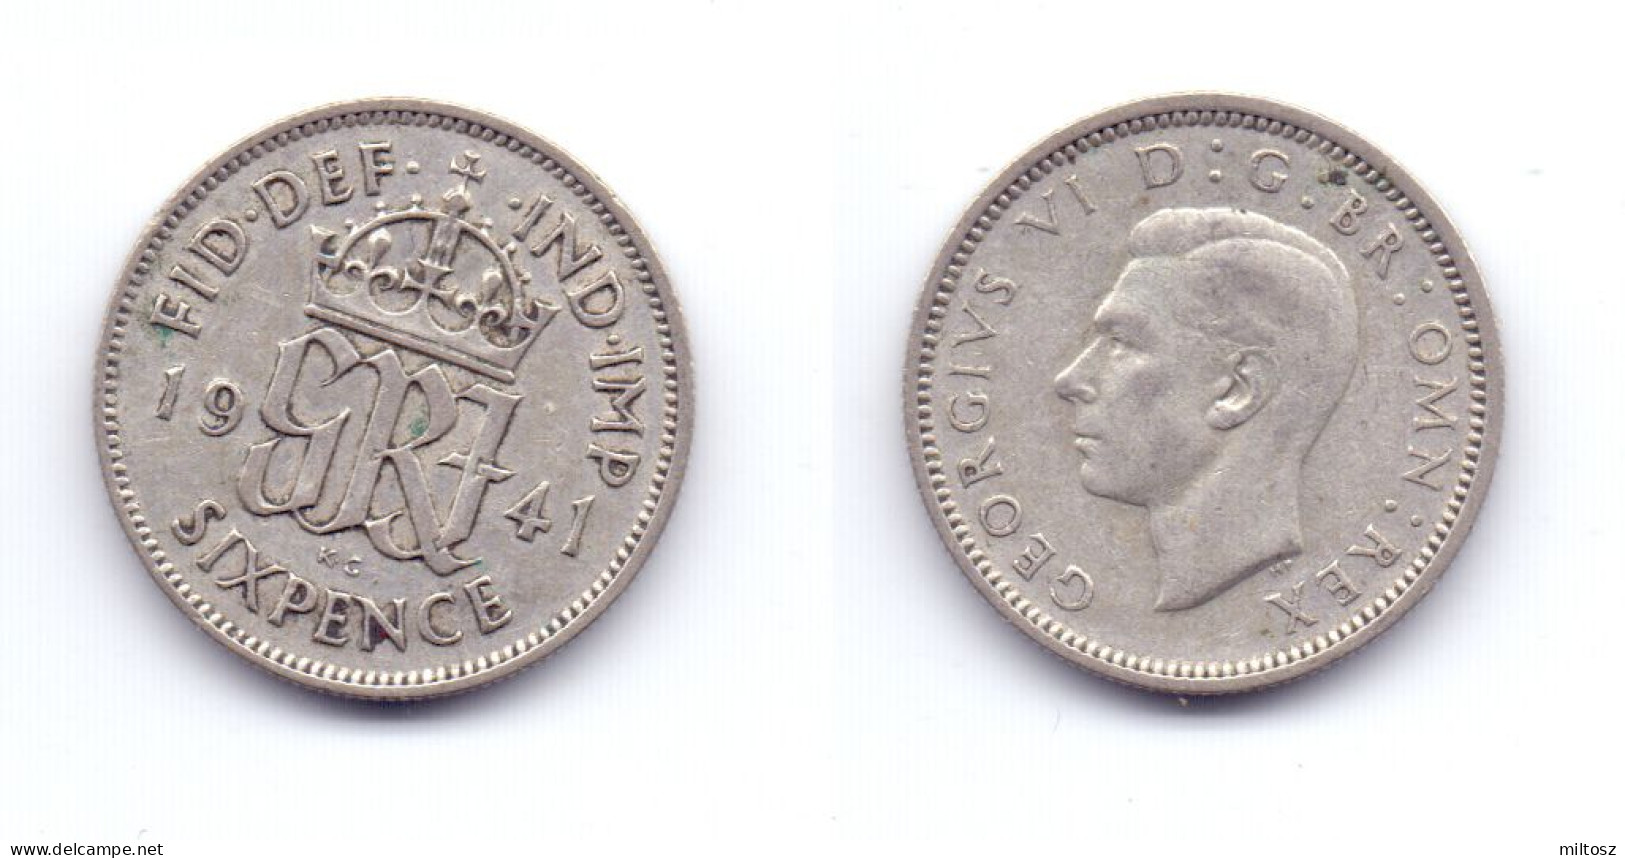 Great Britain 6 Pence 1941 - H. 6 Pence